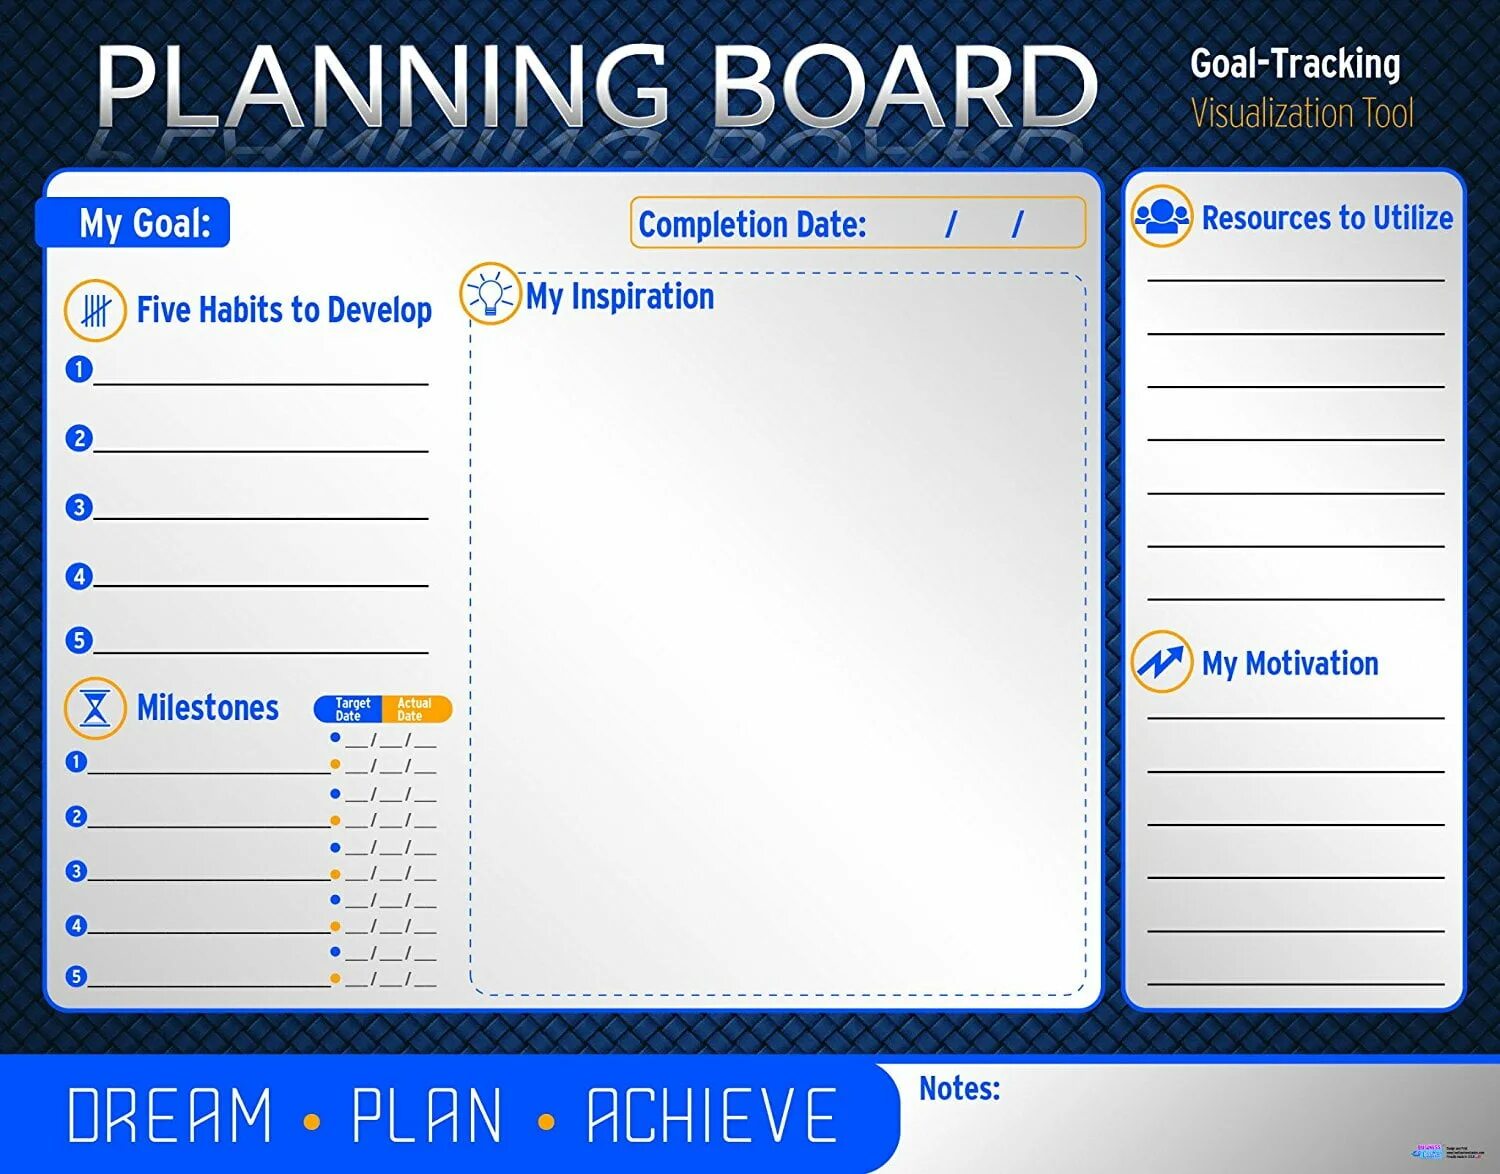 Planning and goal setting. Cheap planning. Planning goals Habit. Planning board